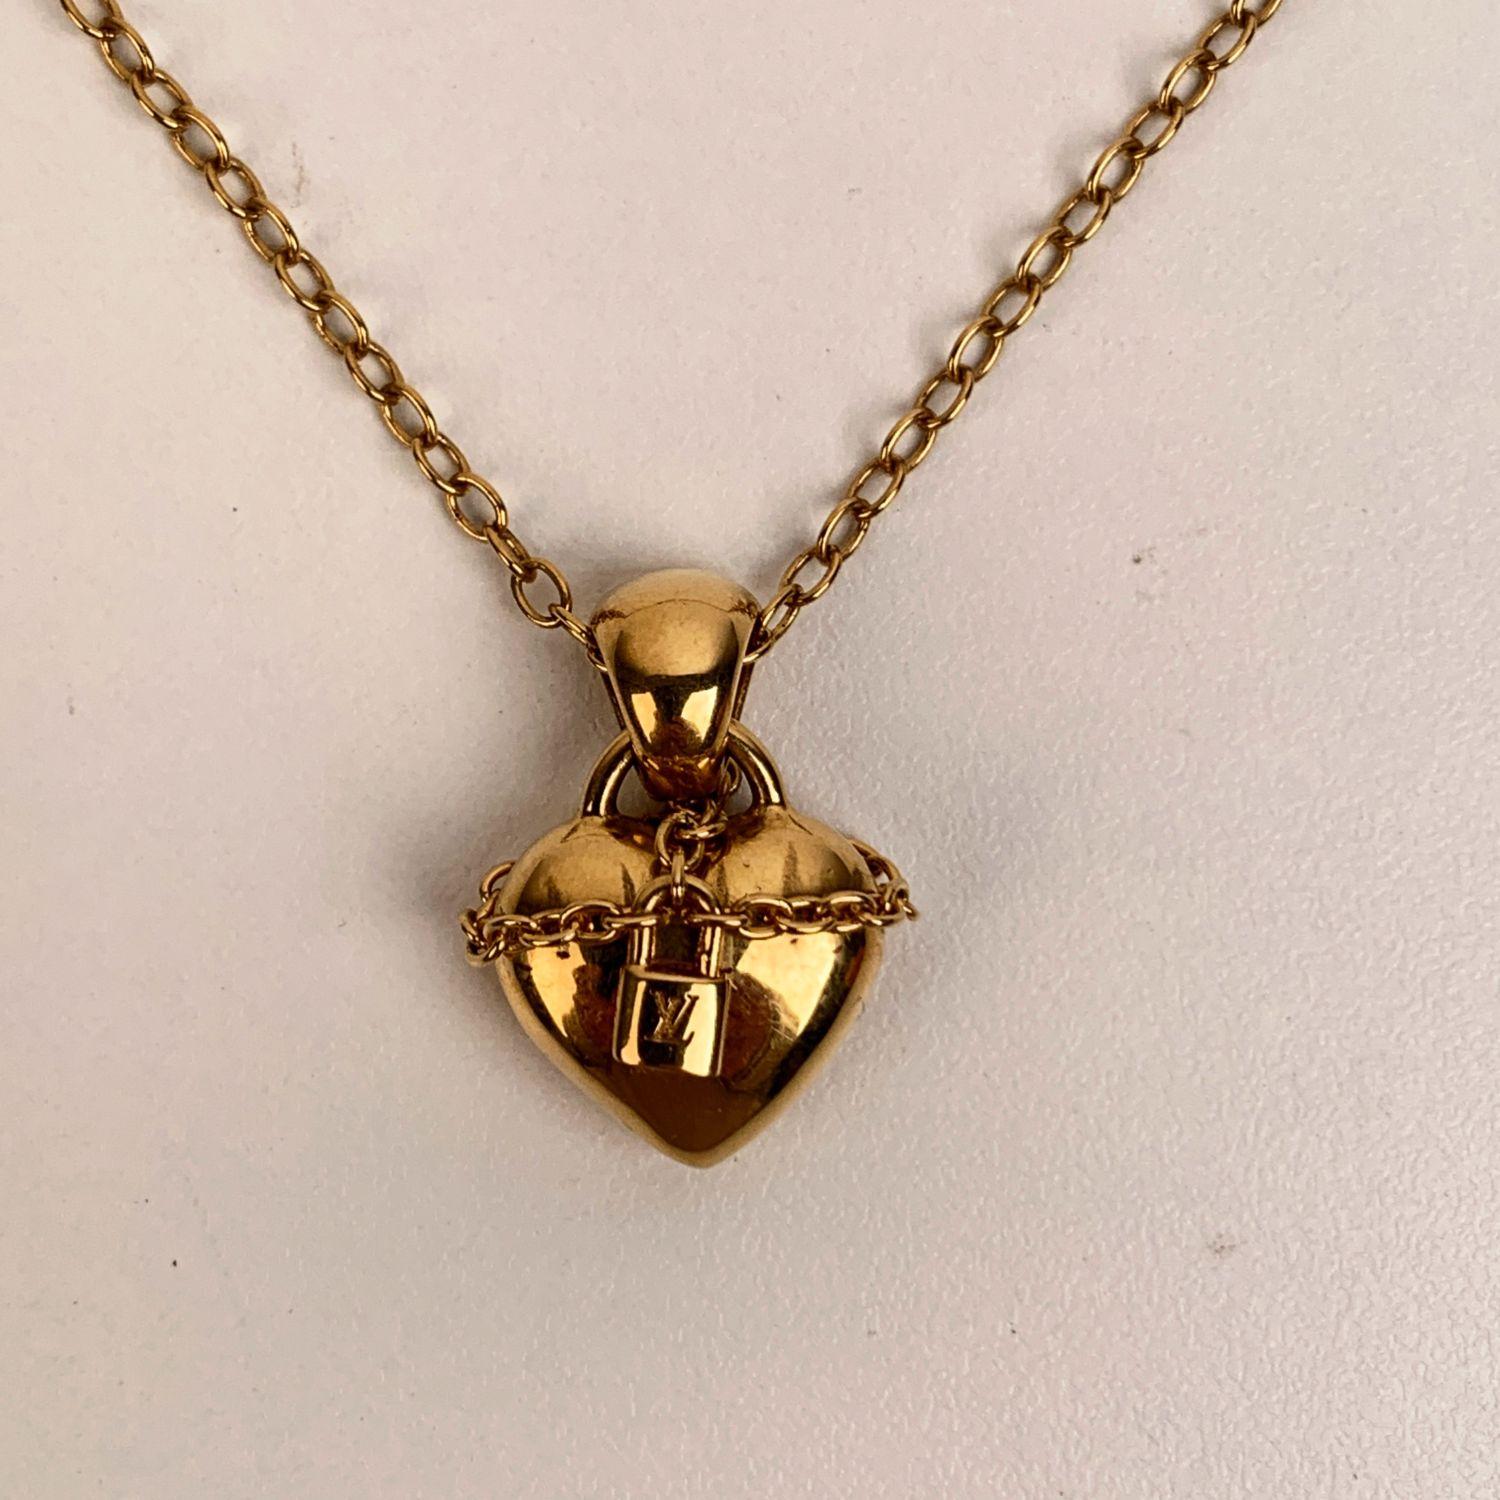 Beautiful Louis Vuitton necklace with heart-shaped pendant with a chain and small padlock with engraved LV initials. It can be worn with 3 different lengths. Clasp closure. 'Louis Vuitton Paris - made in Germany' engraved on oval tab near the